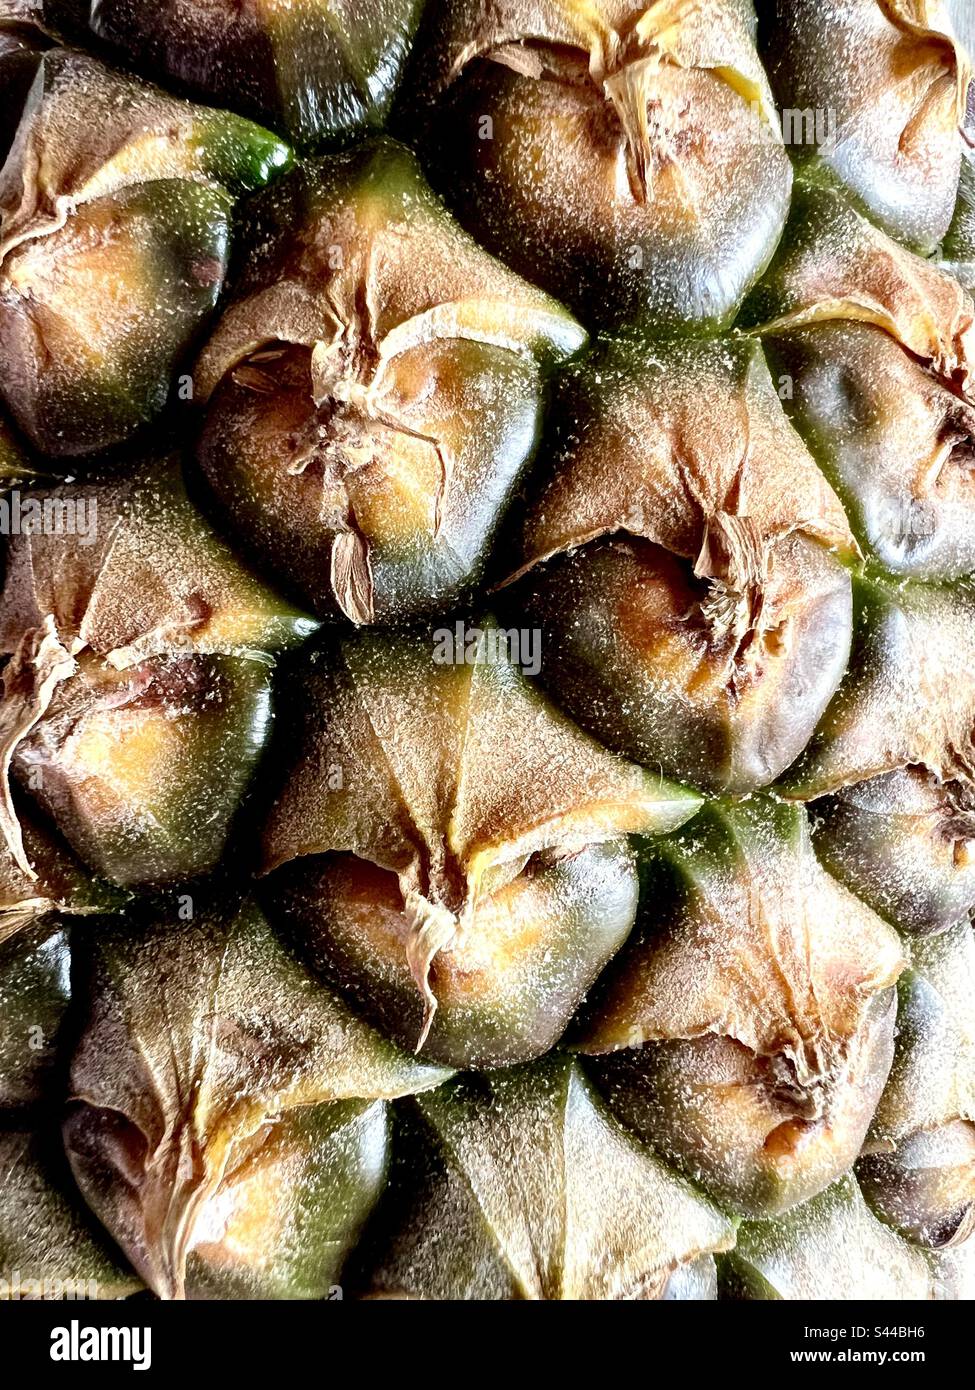 Close up details of a pineapple Stock Photo